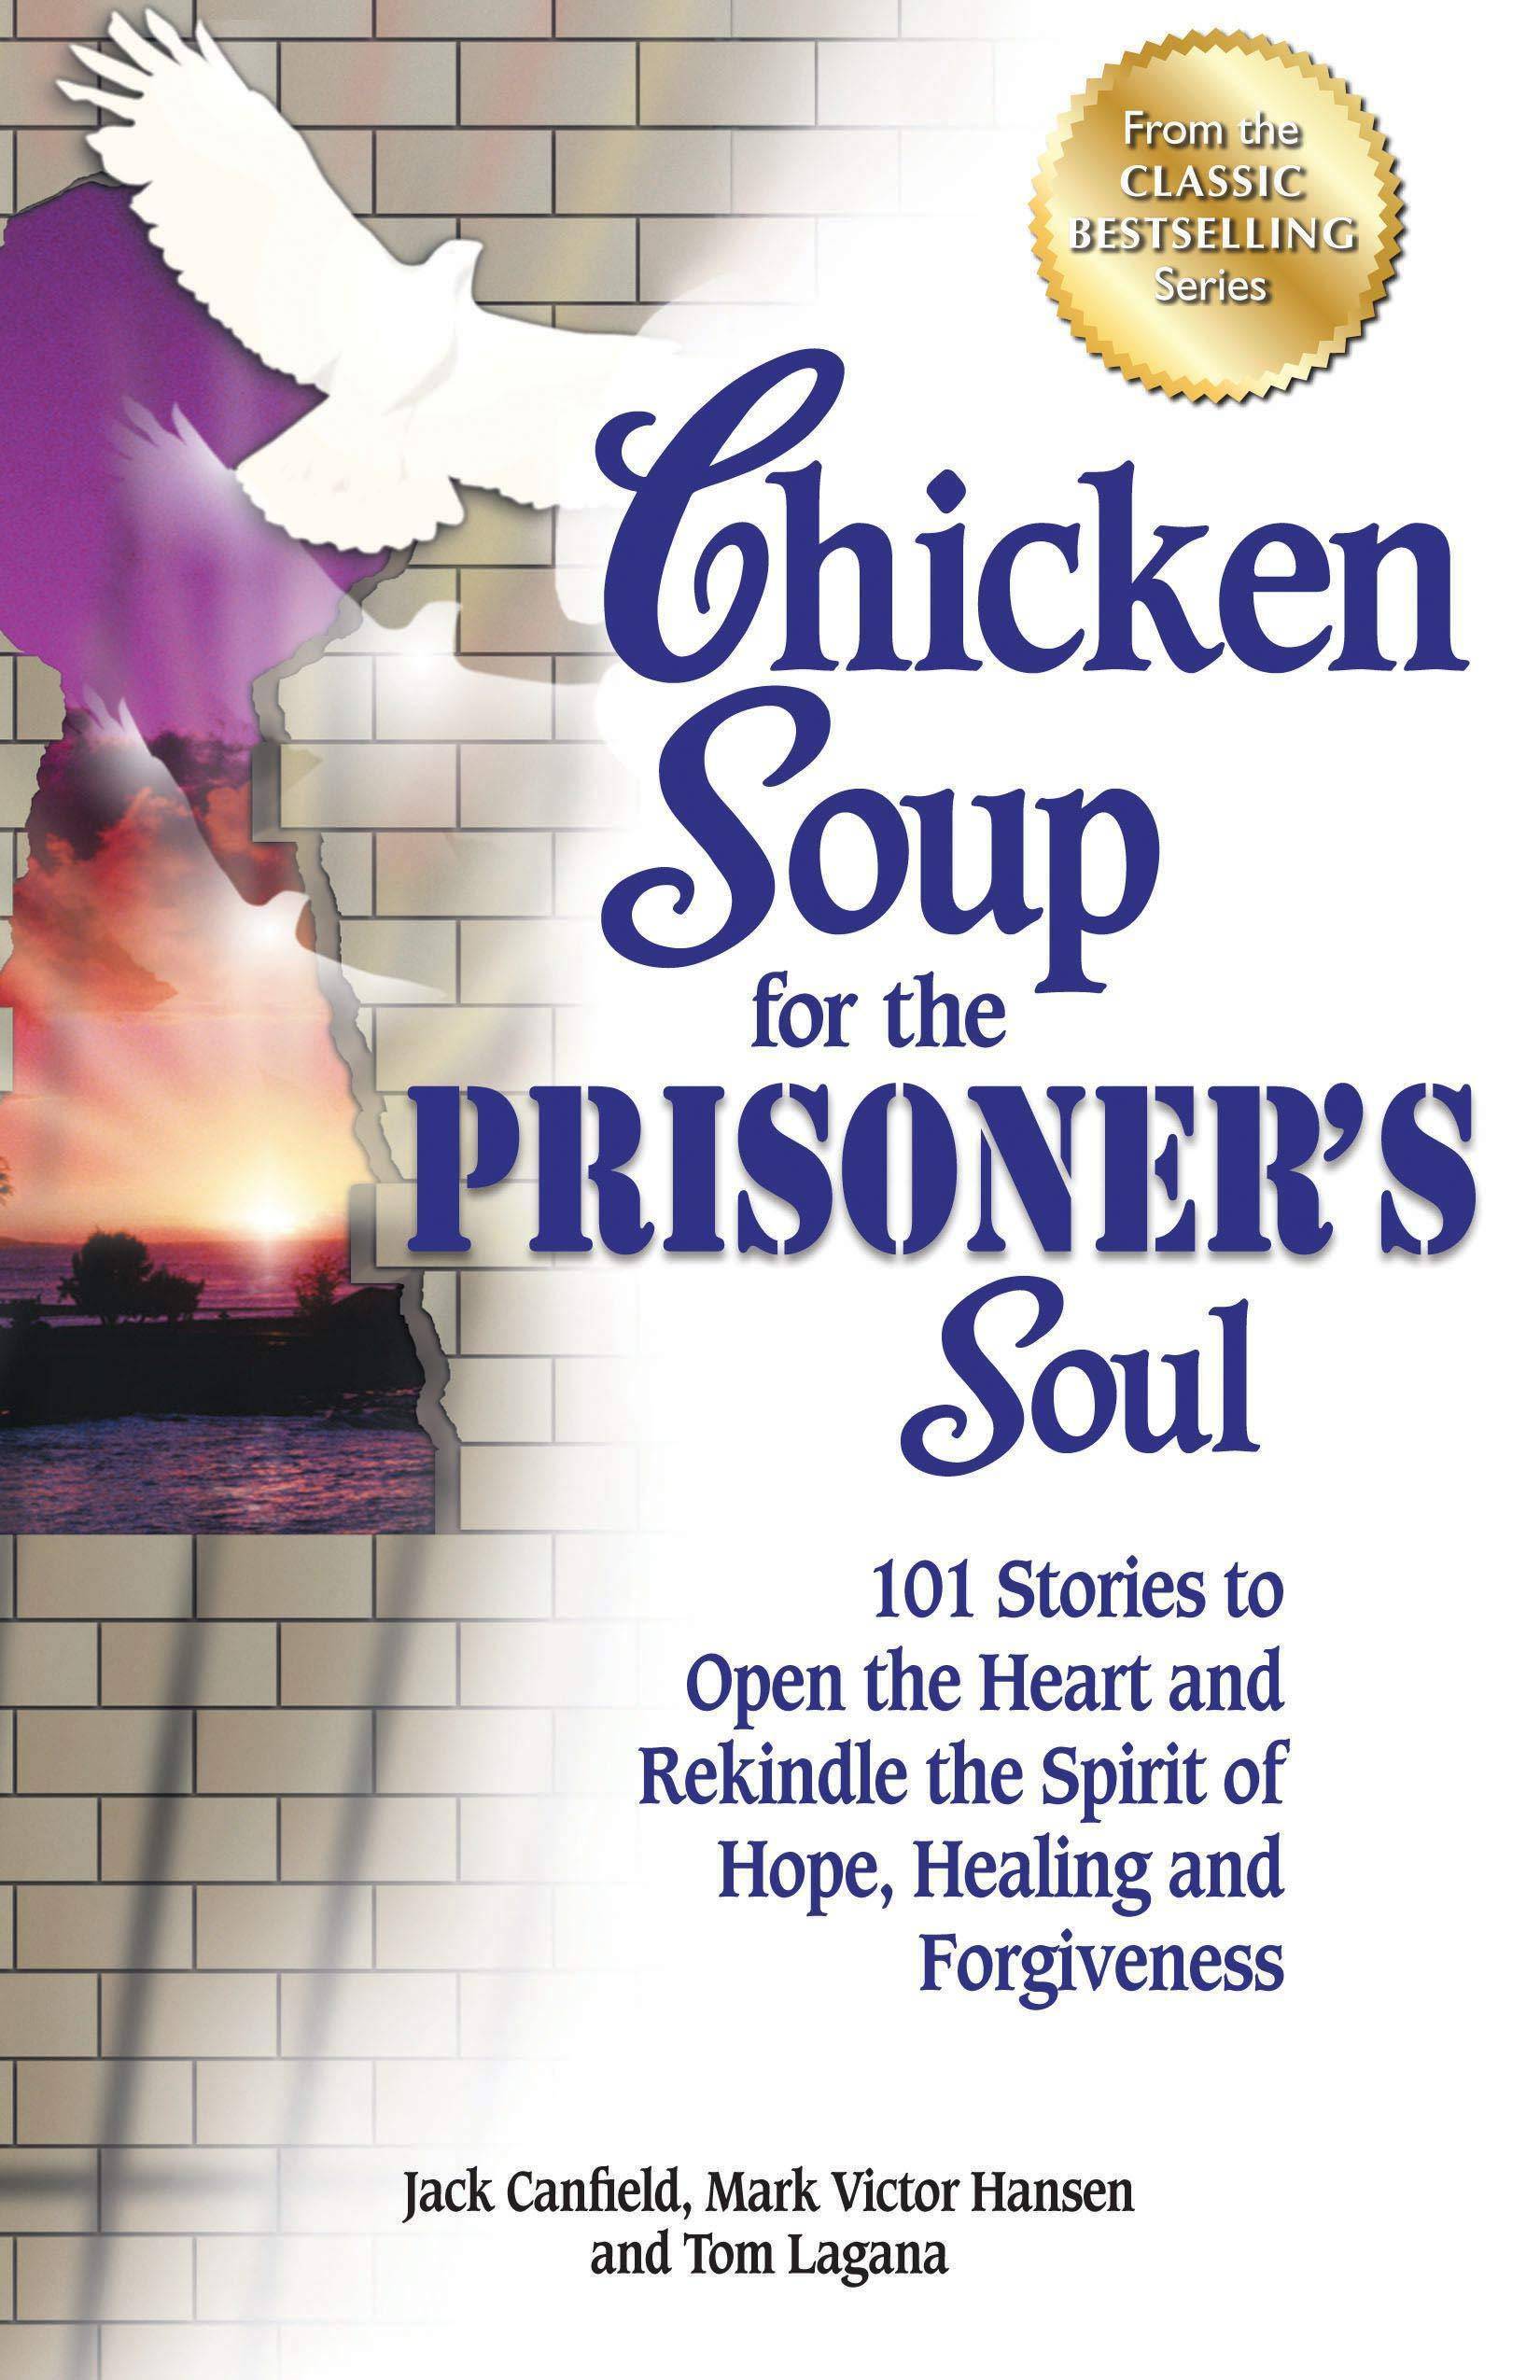 Chicken Soup for the Prisoner's Soul: 101 Stories to Open the He - SureShot Books Publishing LLC